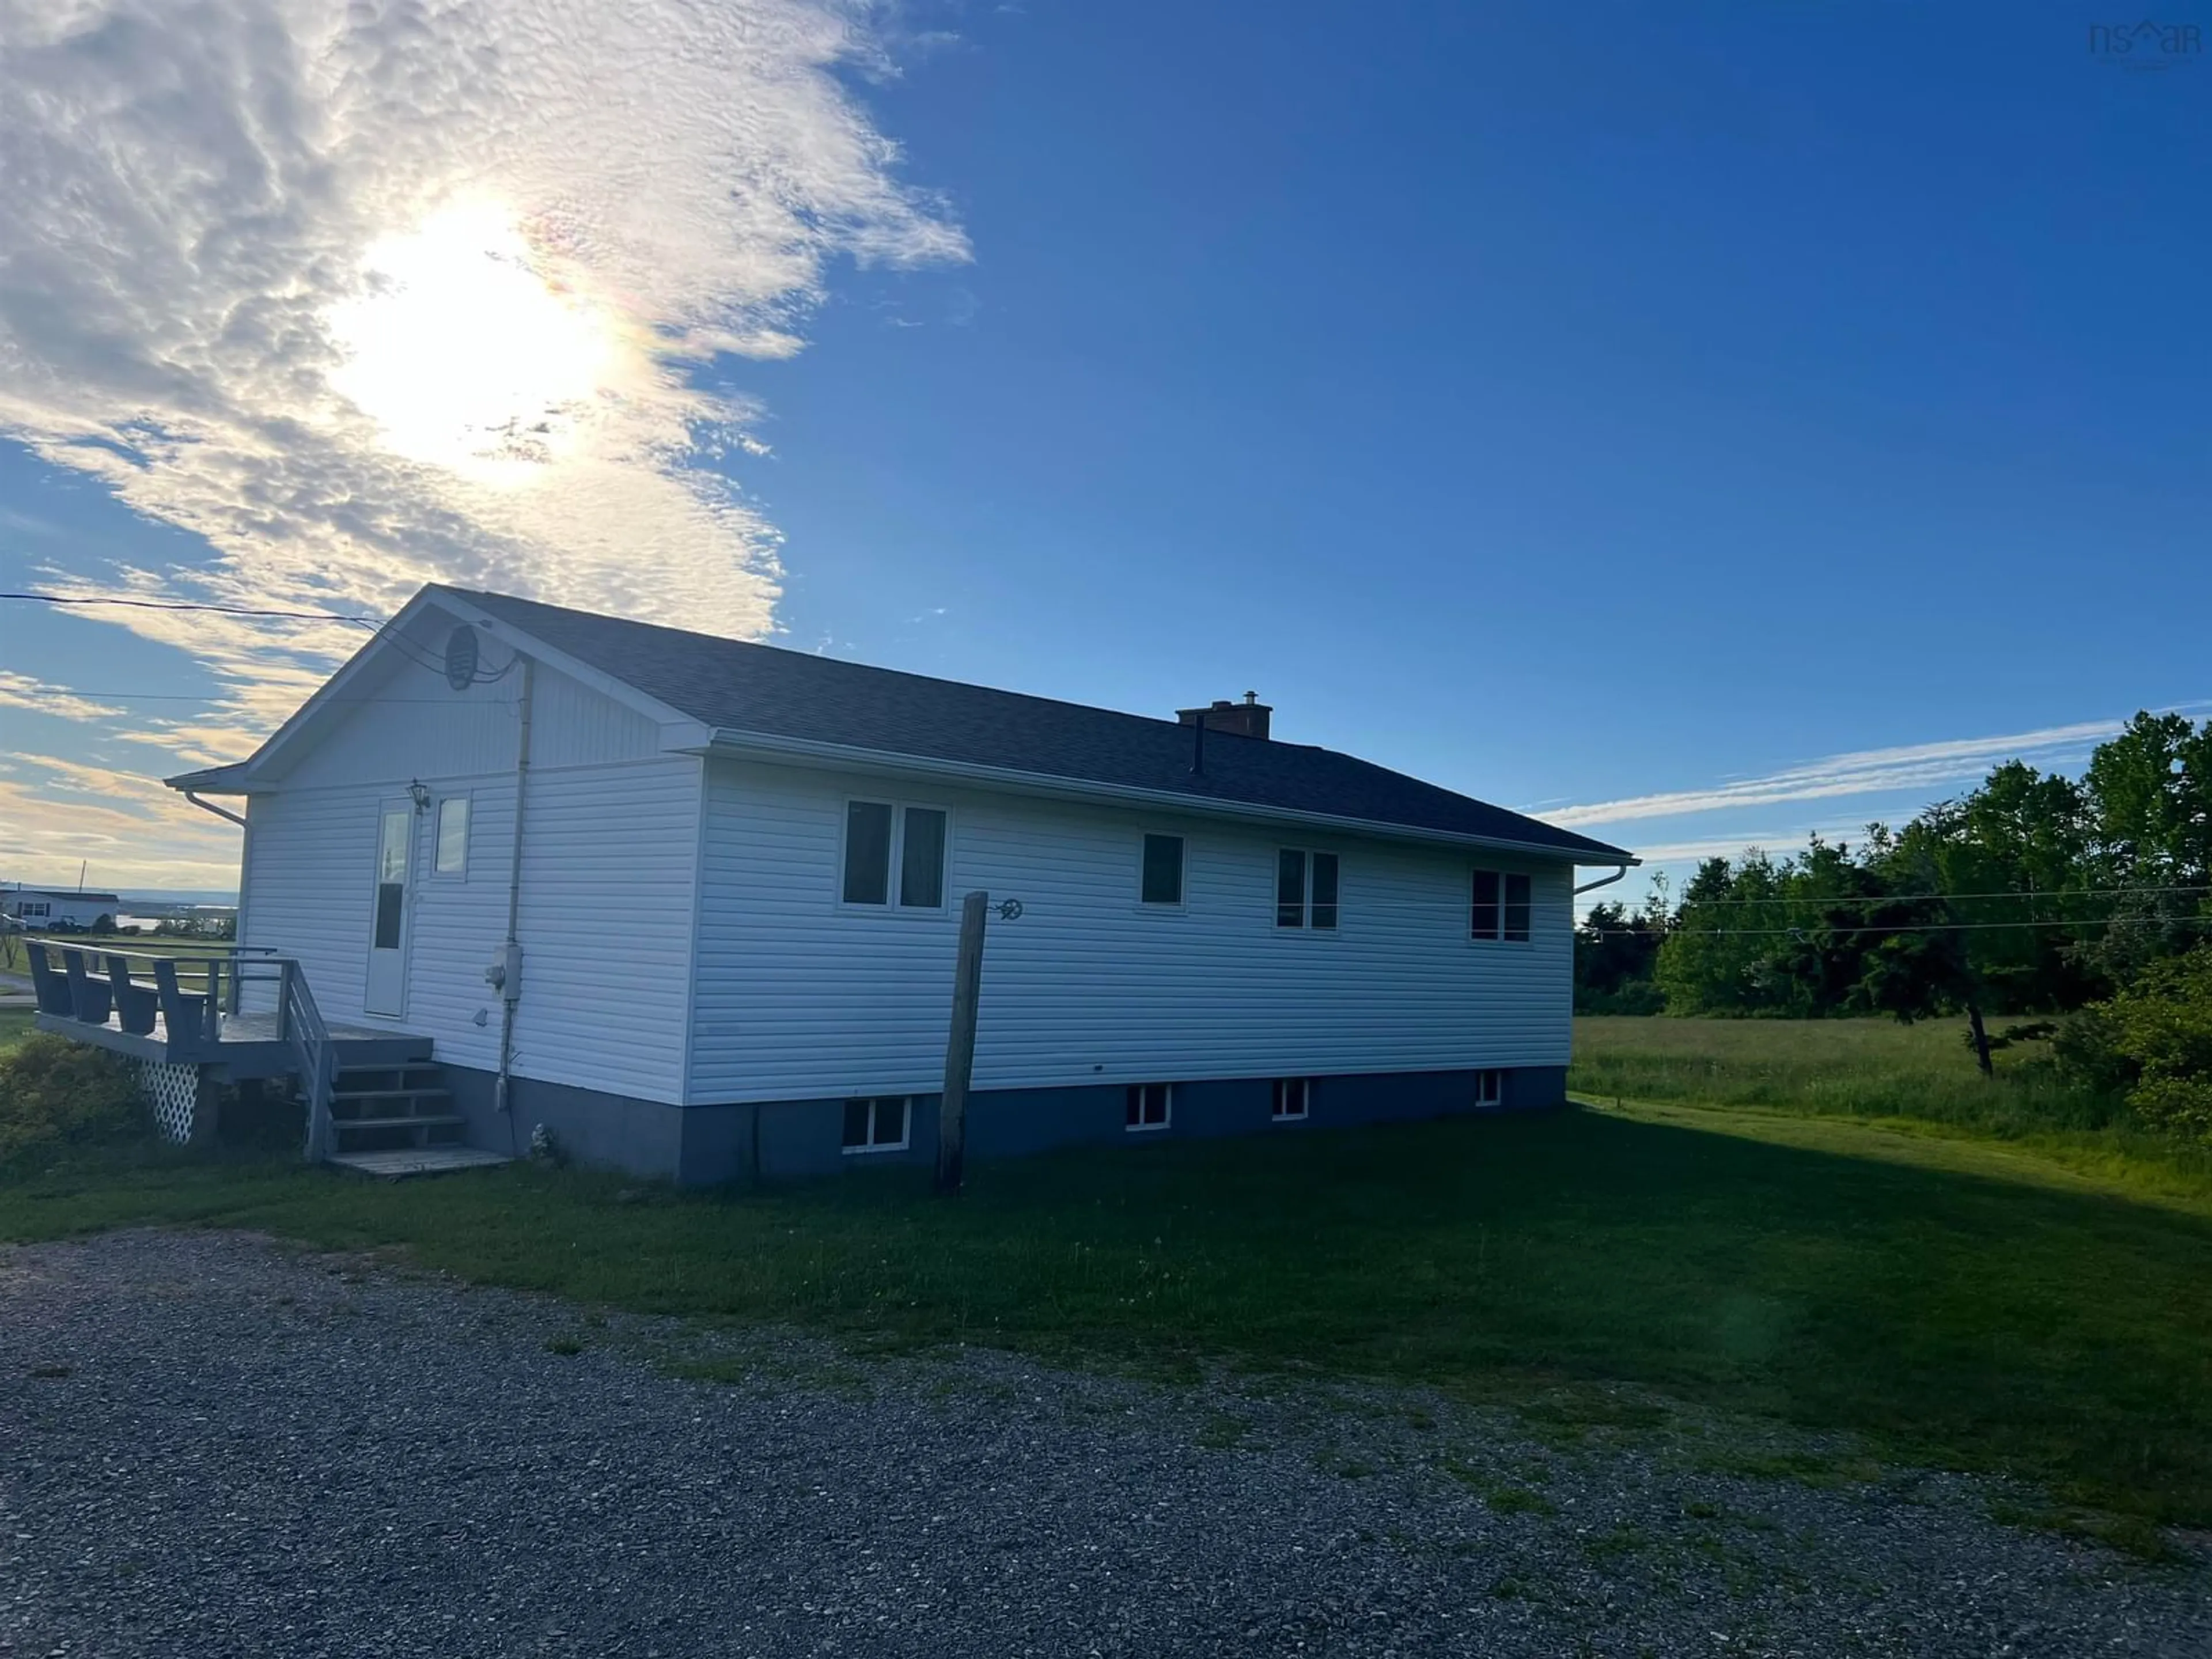 Cottage for 556 East Tracadie Rd, East Tracadie Nova Scotia B0H 1W0